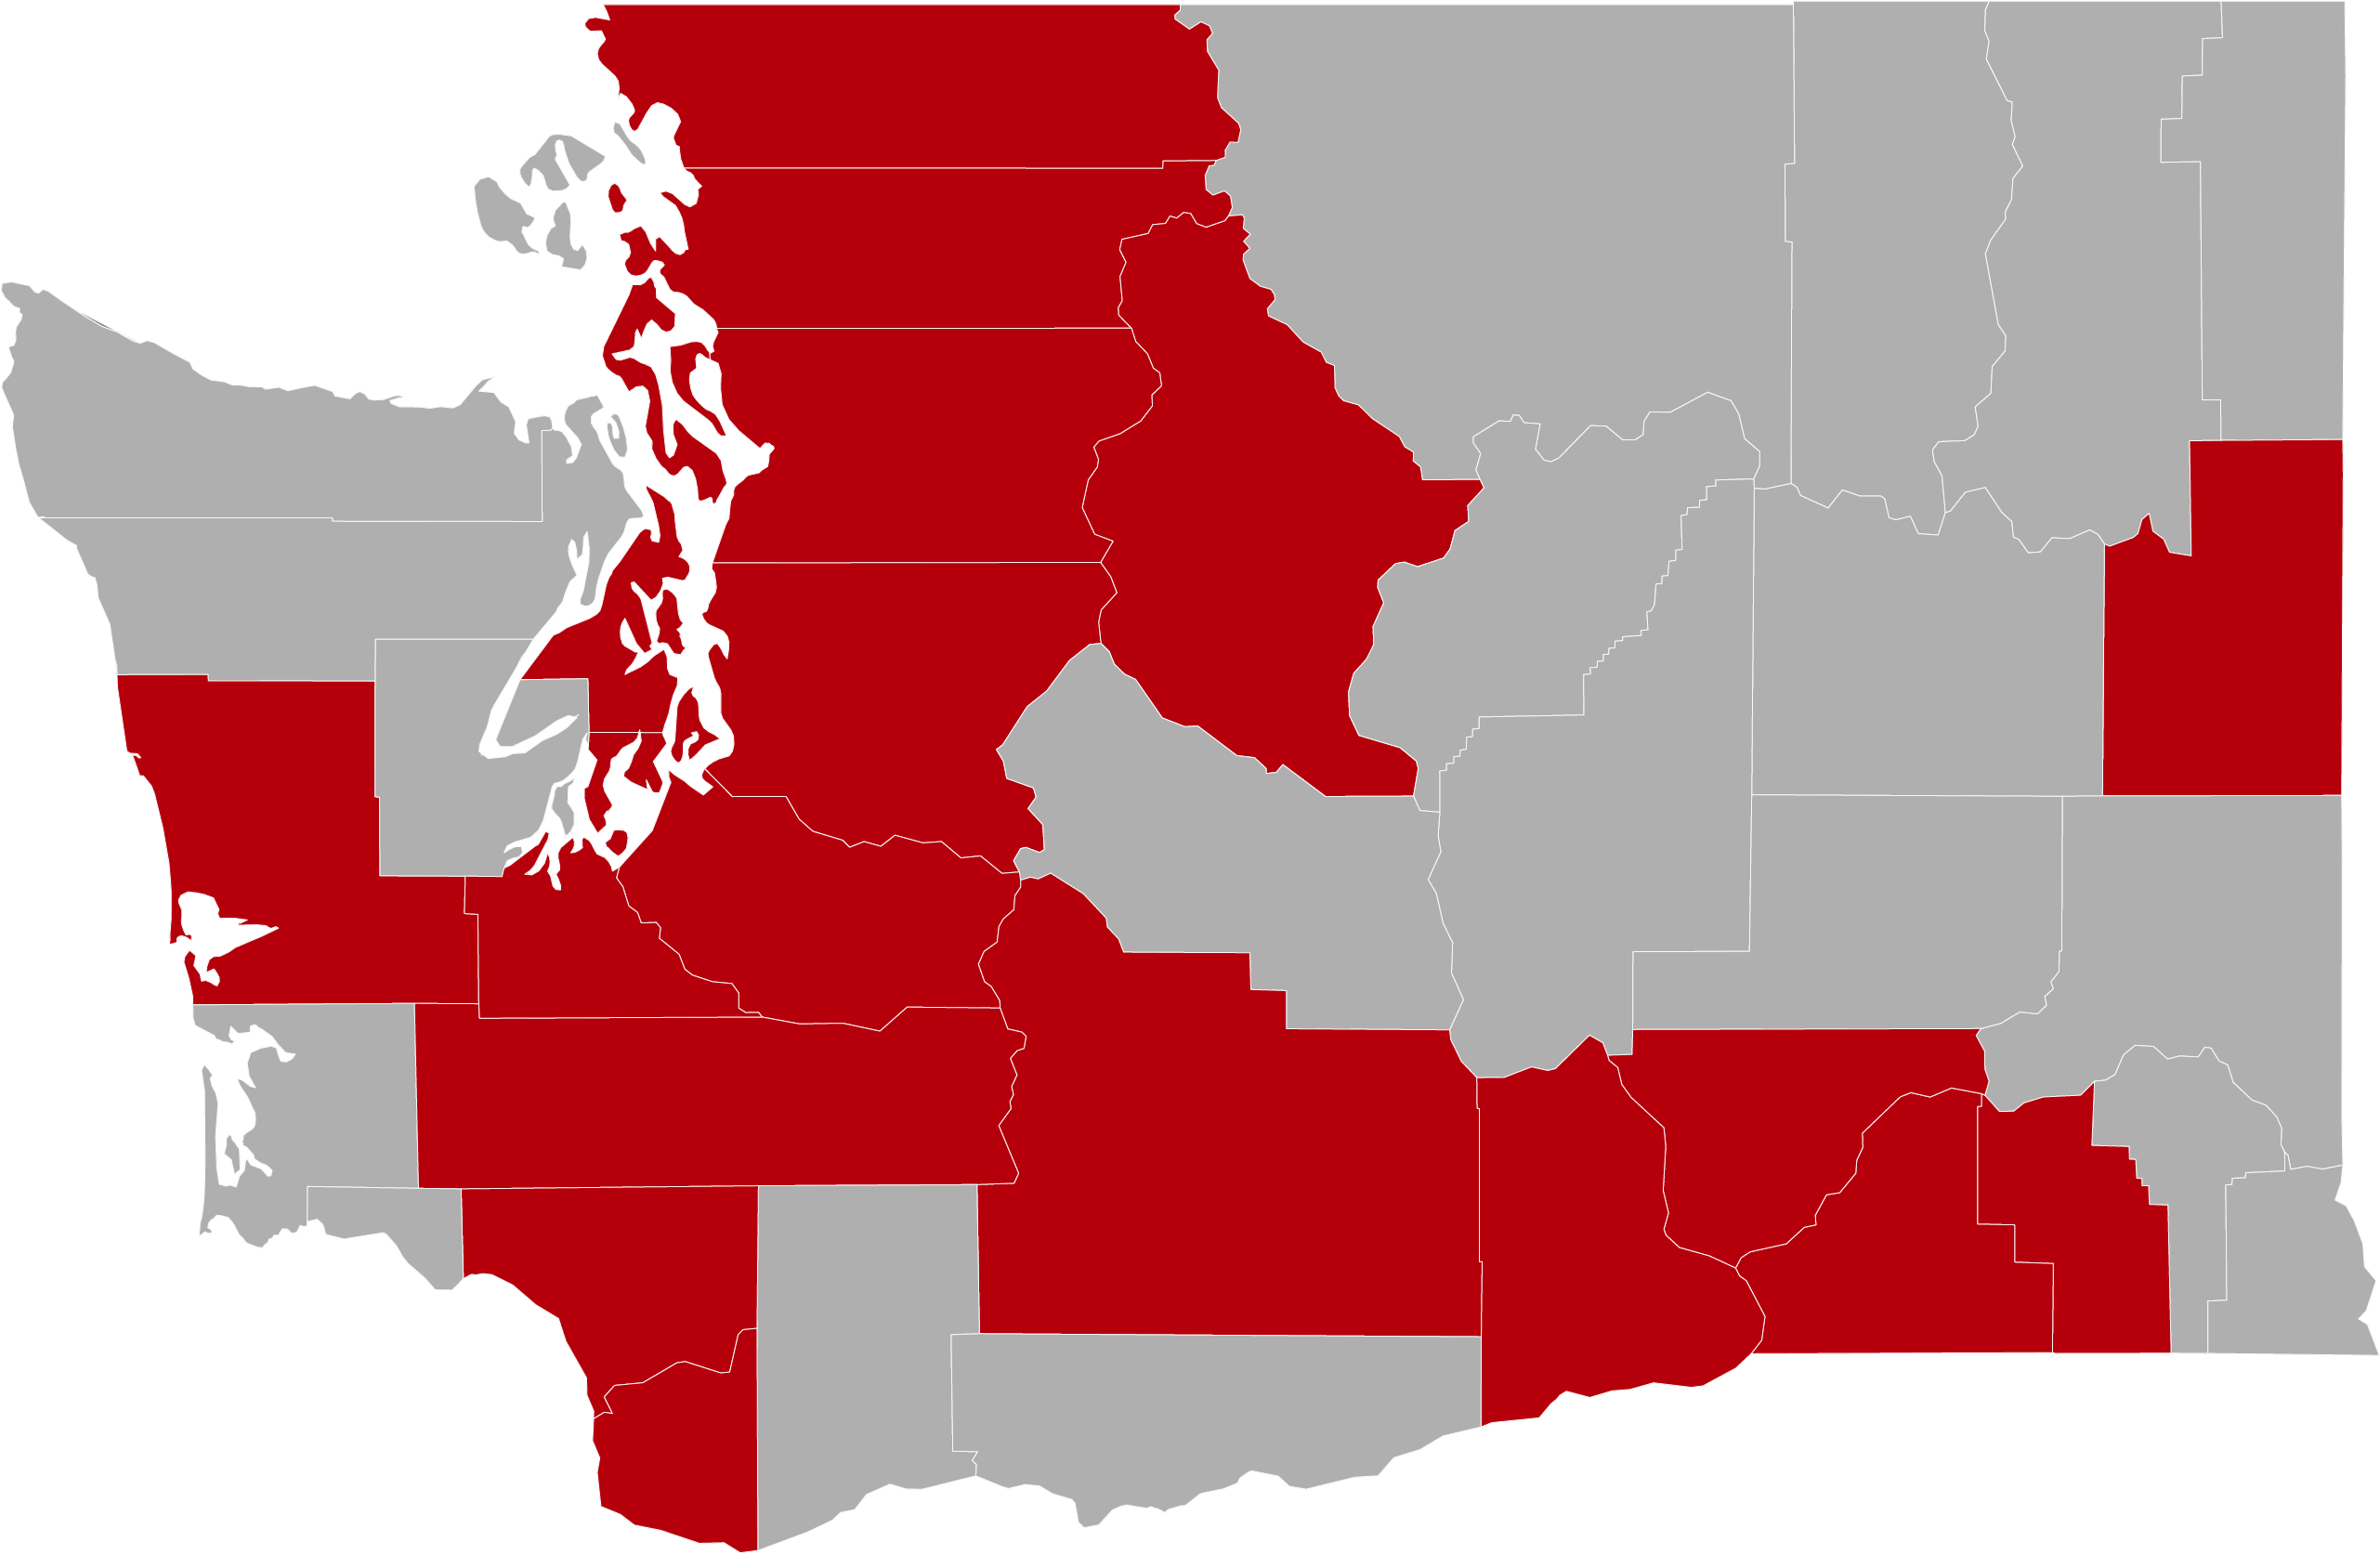 Washington state map with 18 counties colored in red to represent EnhanceFitness.